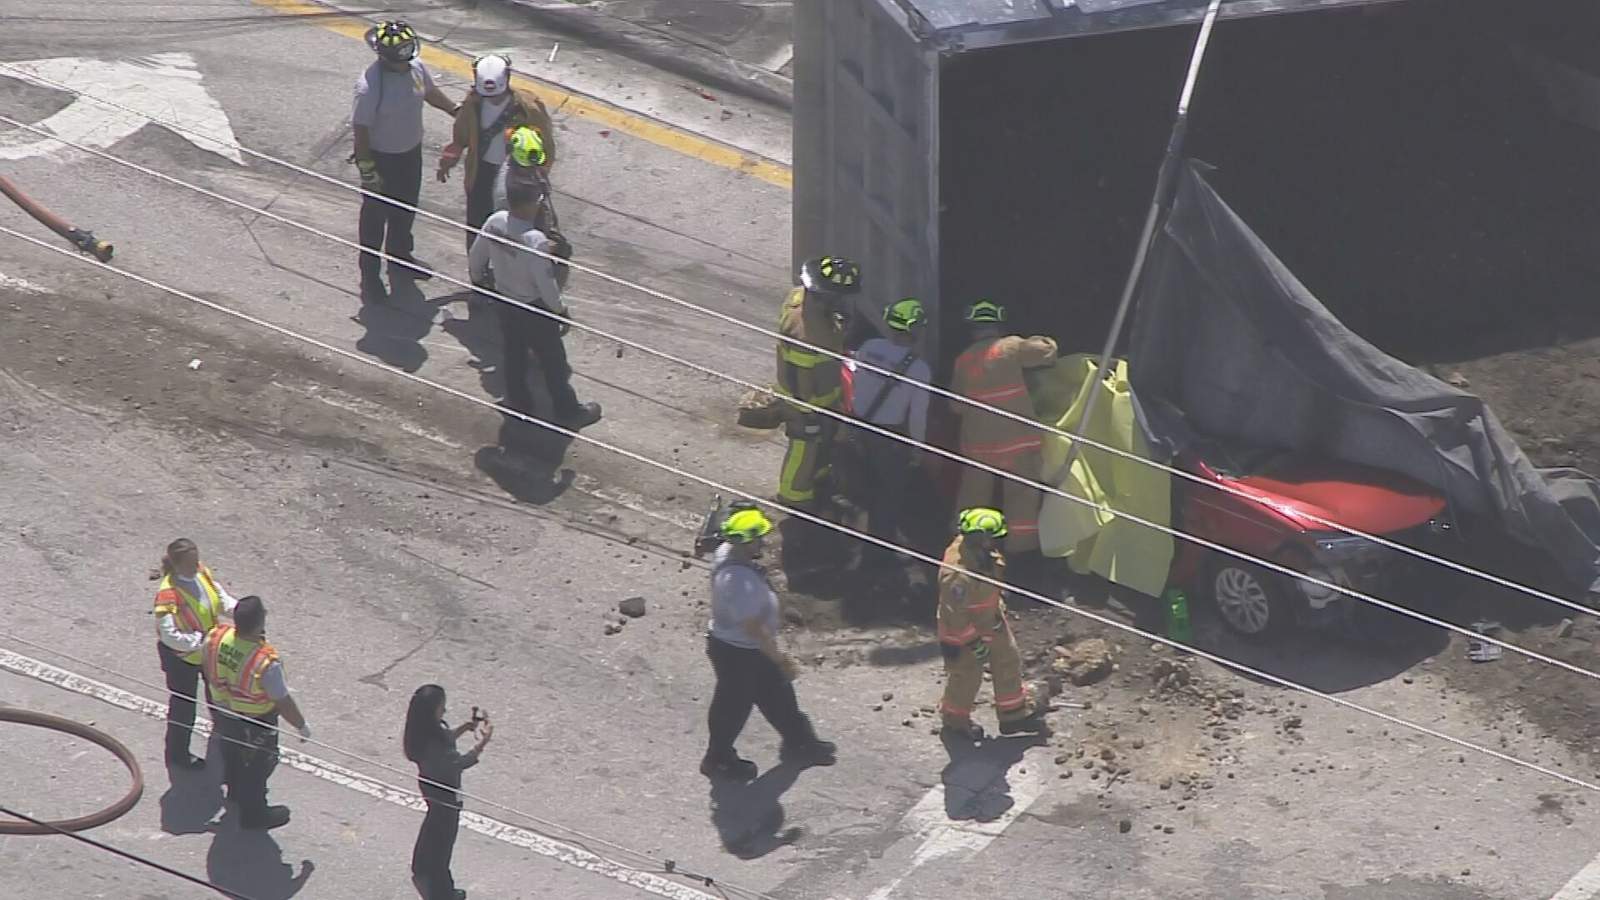 Firefighters work to free a trapped driver after a crash on Monday in Doral.